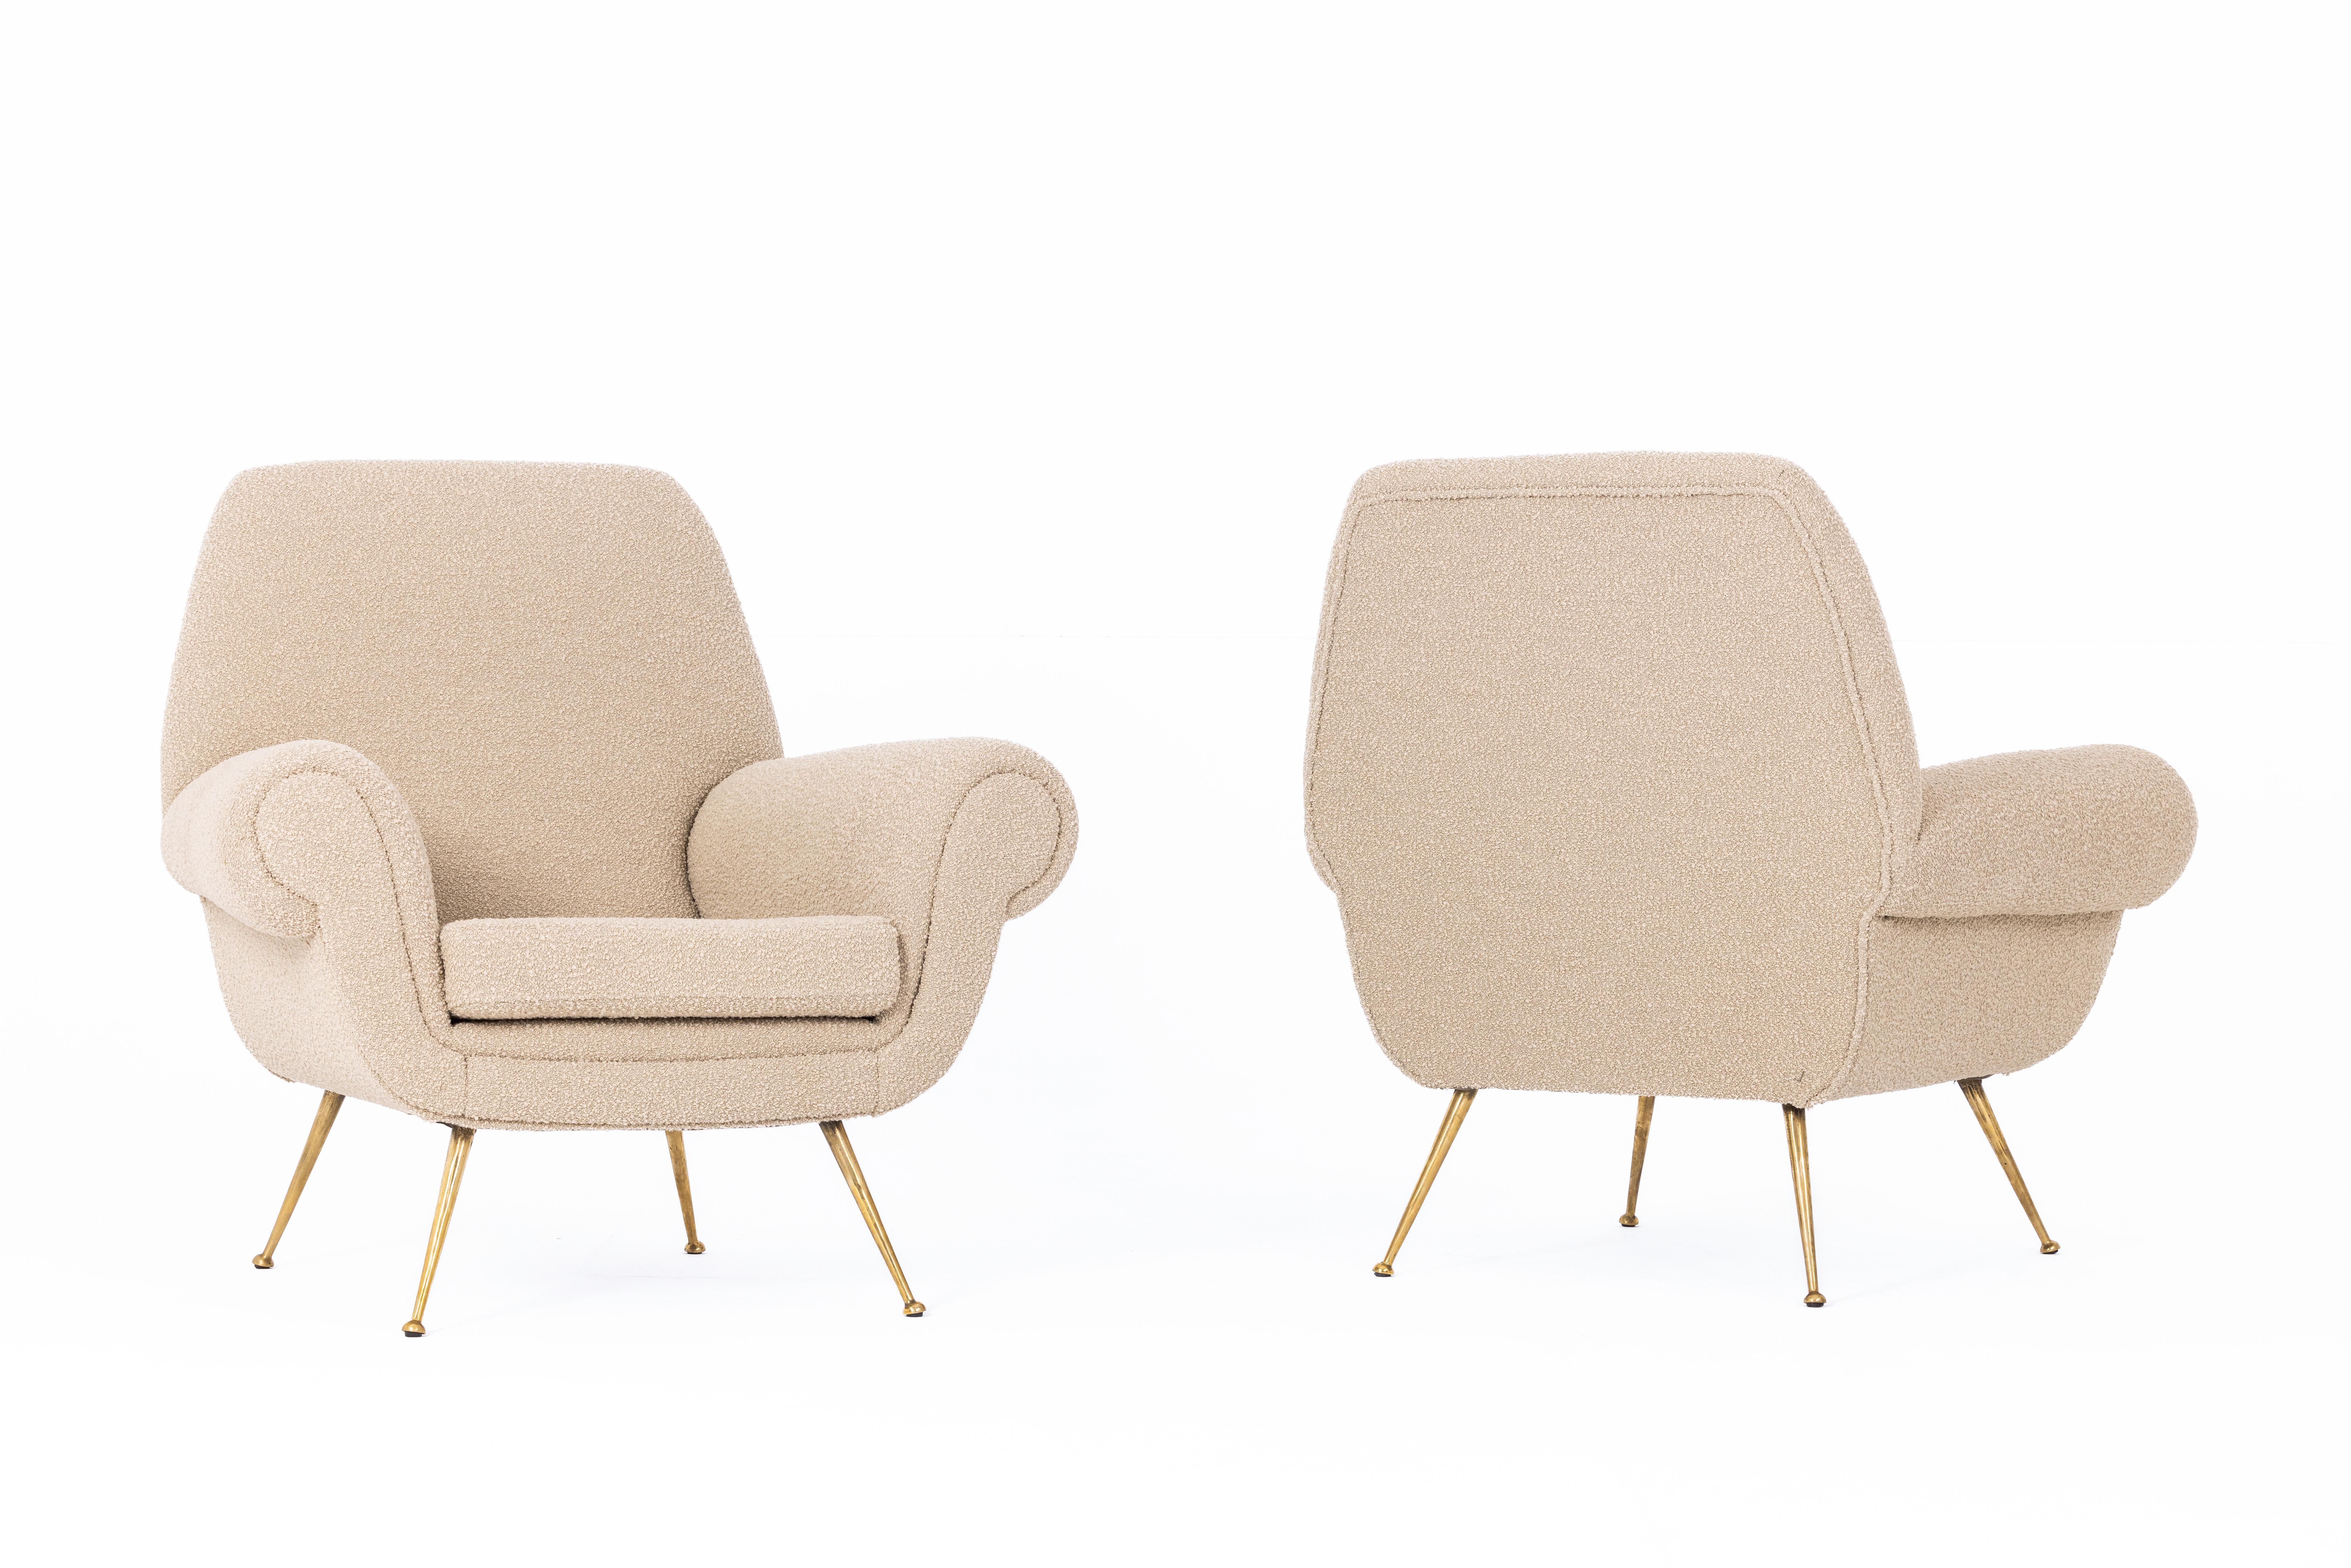 Pair of armchairs designed by Gigi Radice, Italy 1950s, entirely renovated, brass legs, boucle' fabric by Bisson Bruneel (Bergamo)